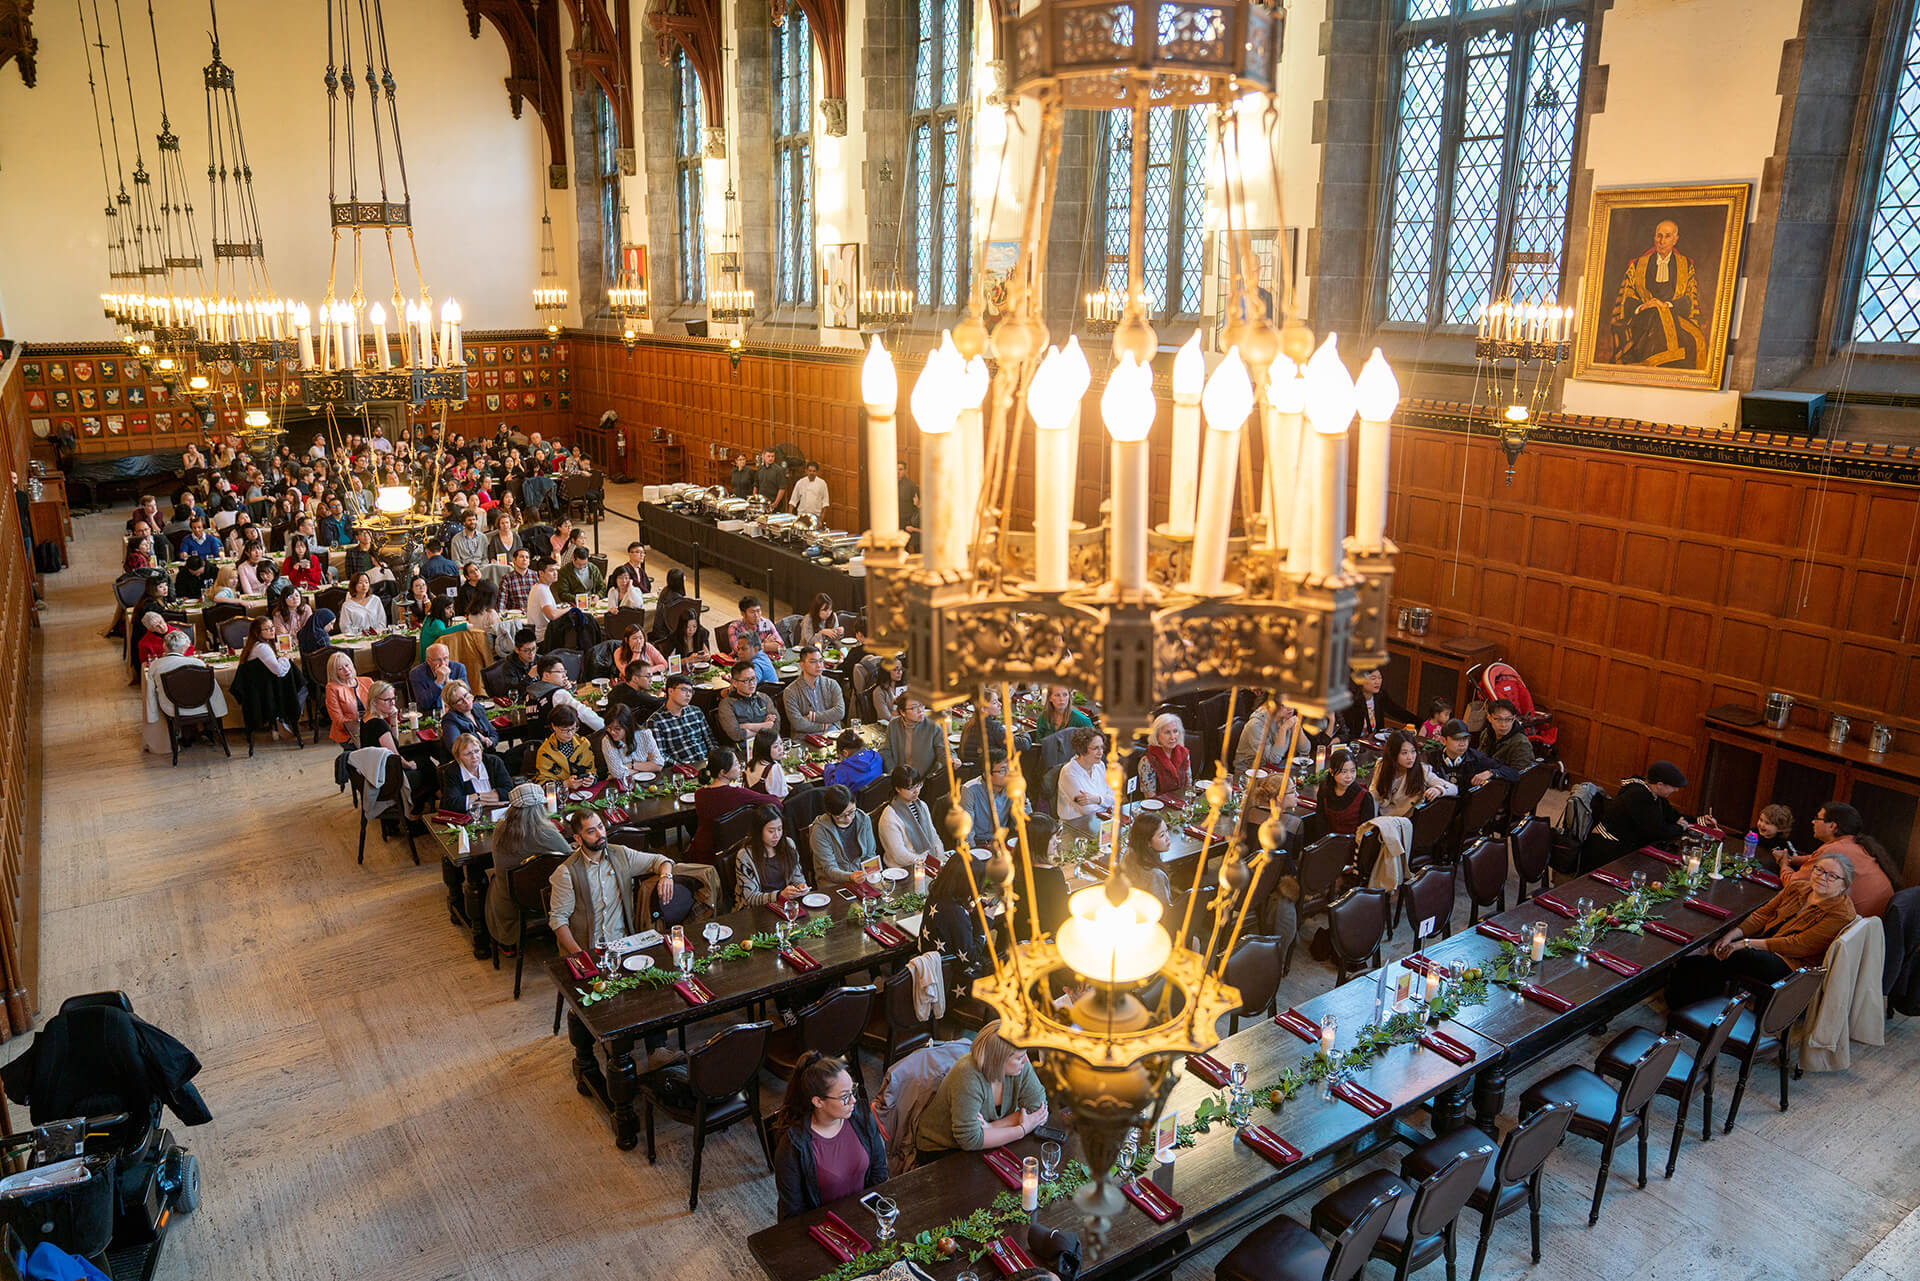 The Great Hall tables set for a dinner